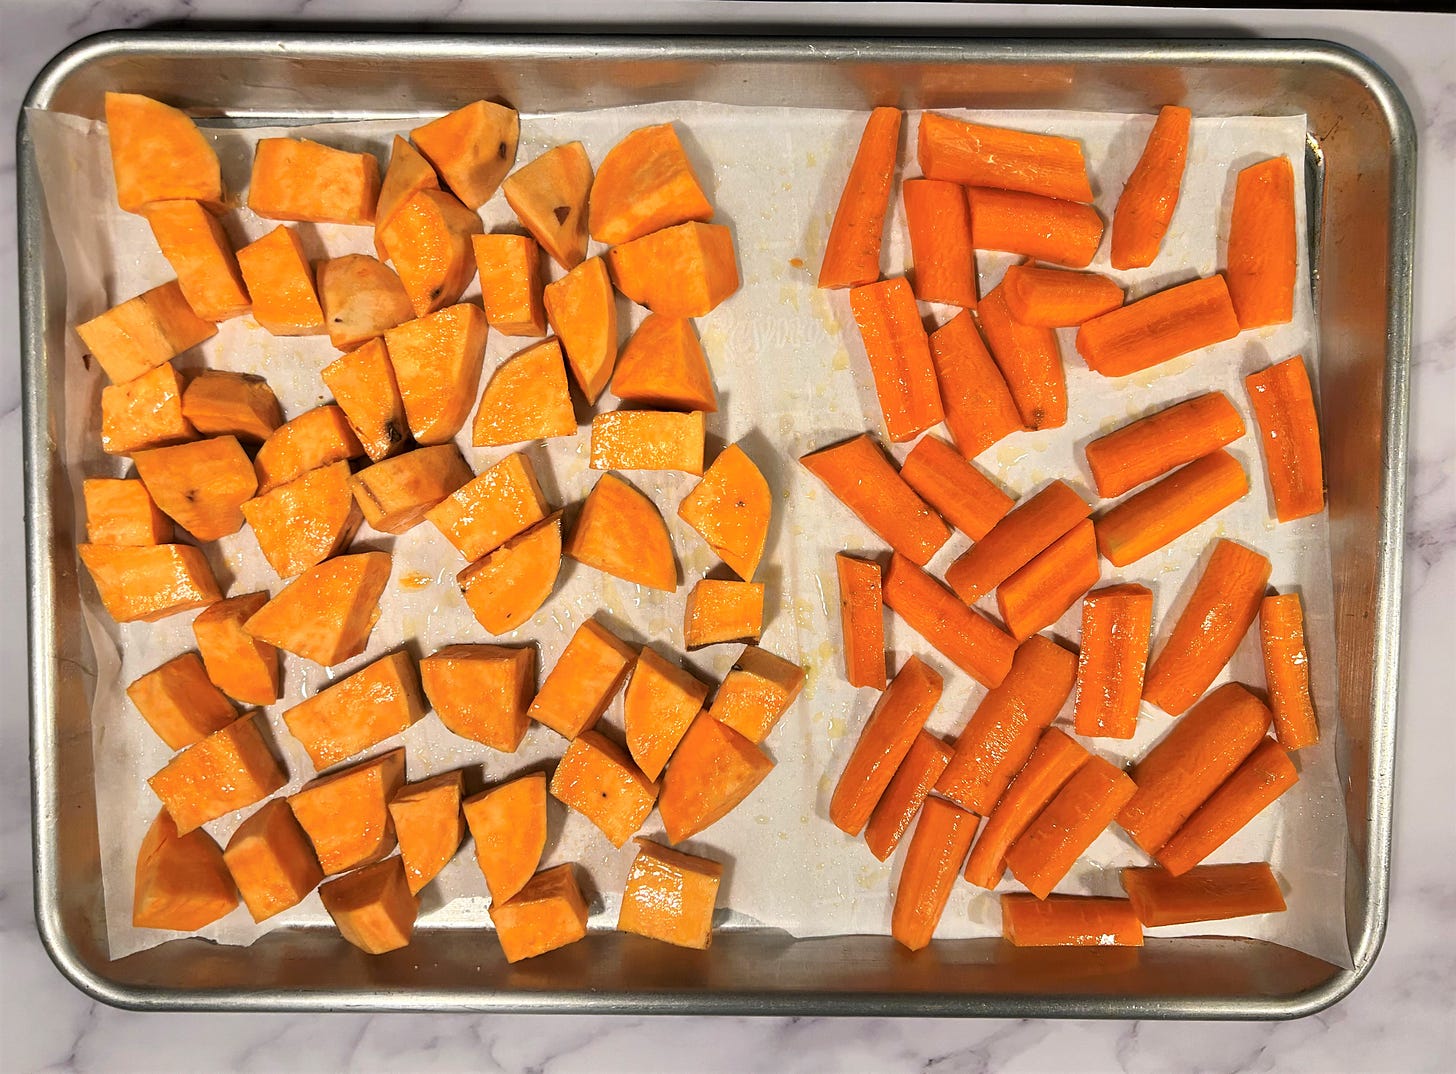 Prepped Sweet Potatoes and Carrots for Roasting